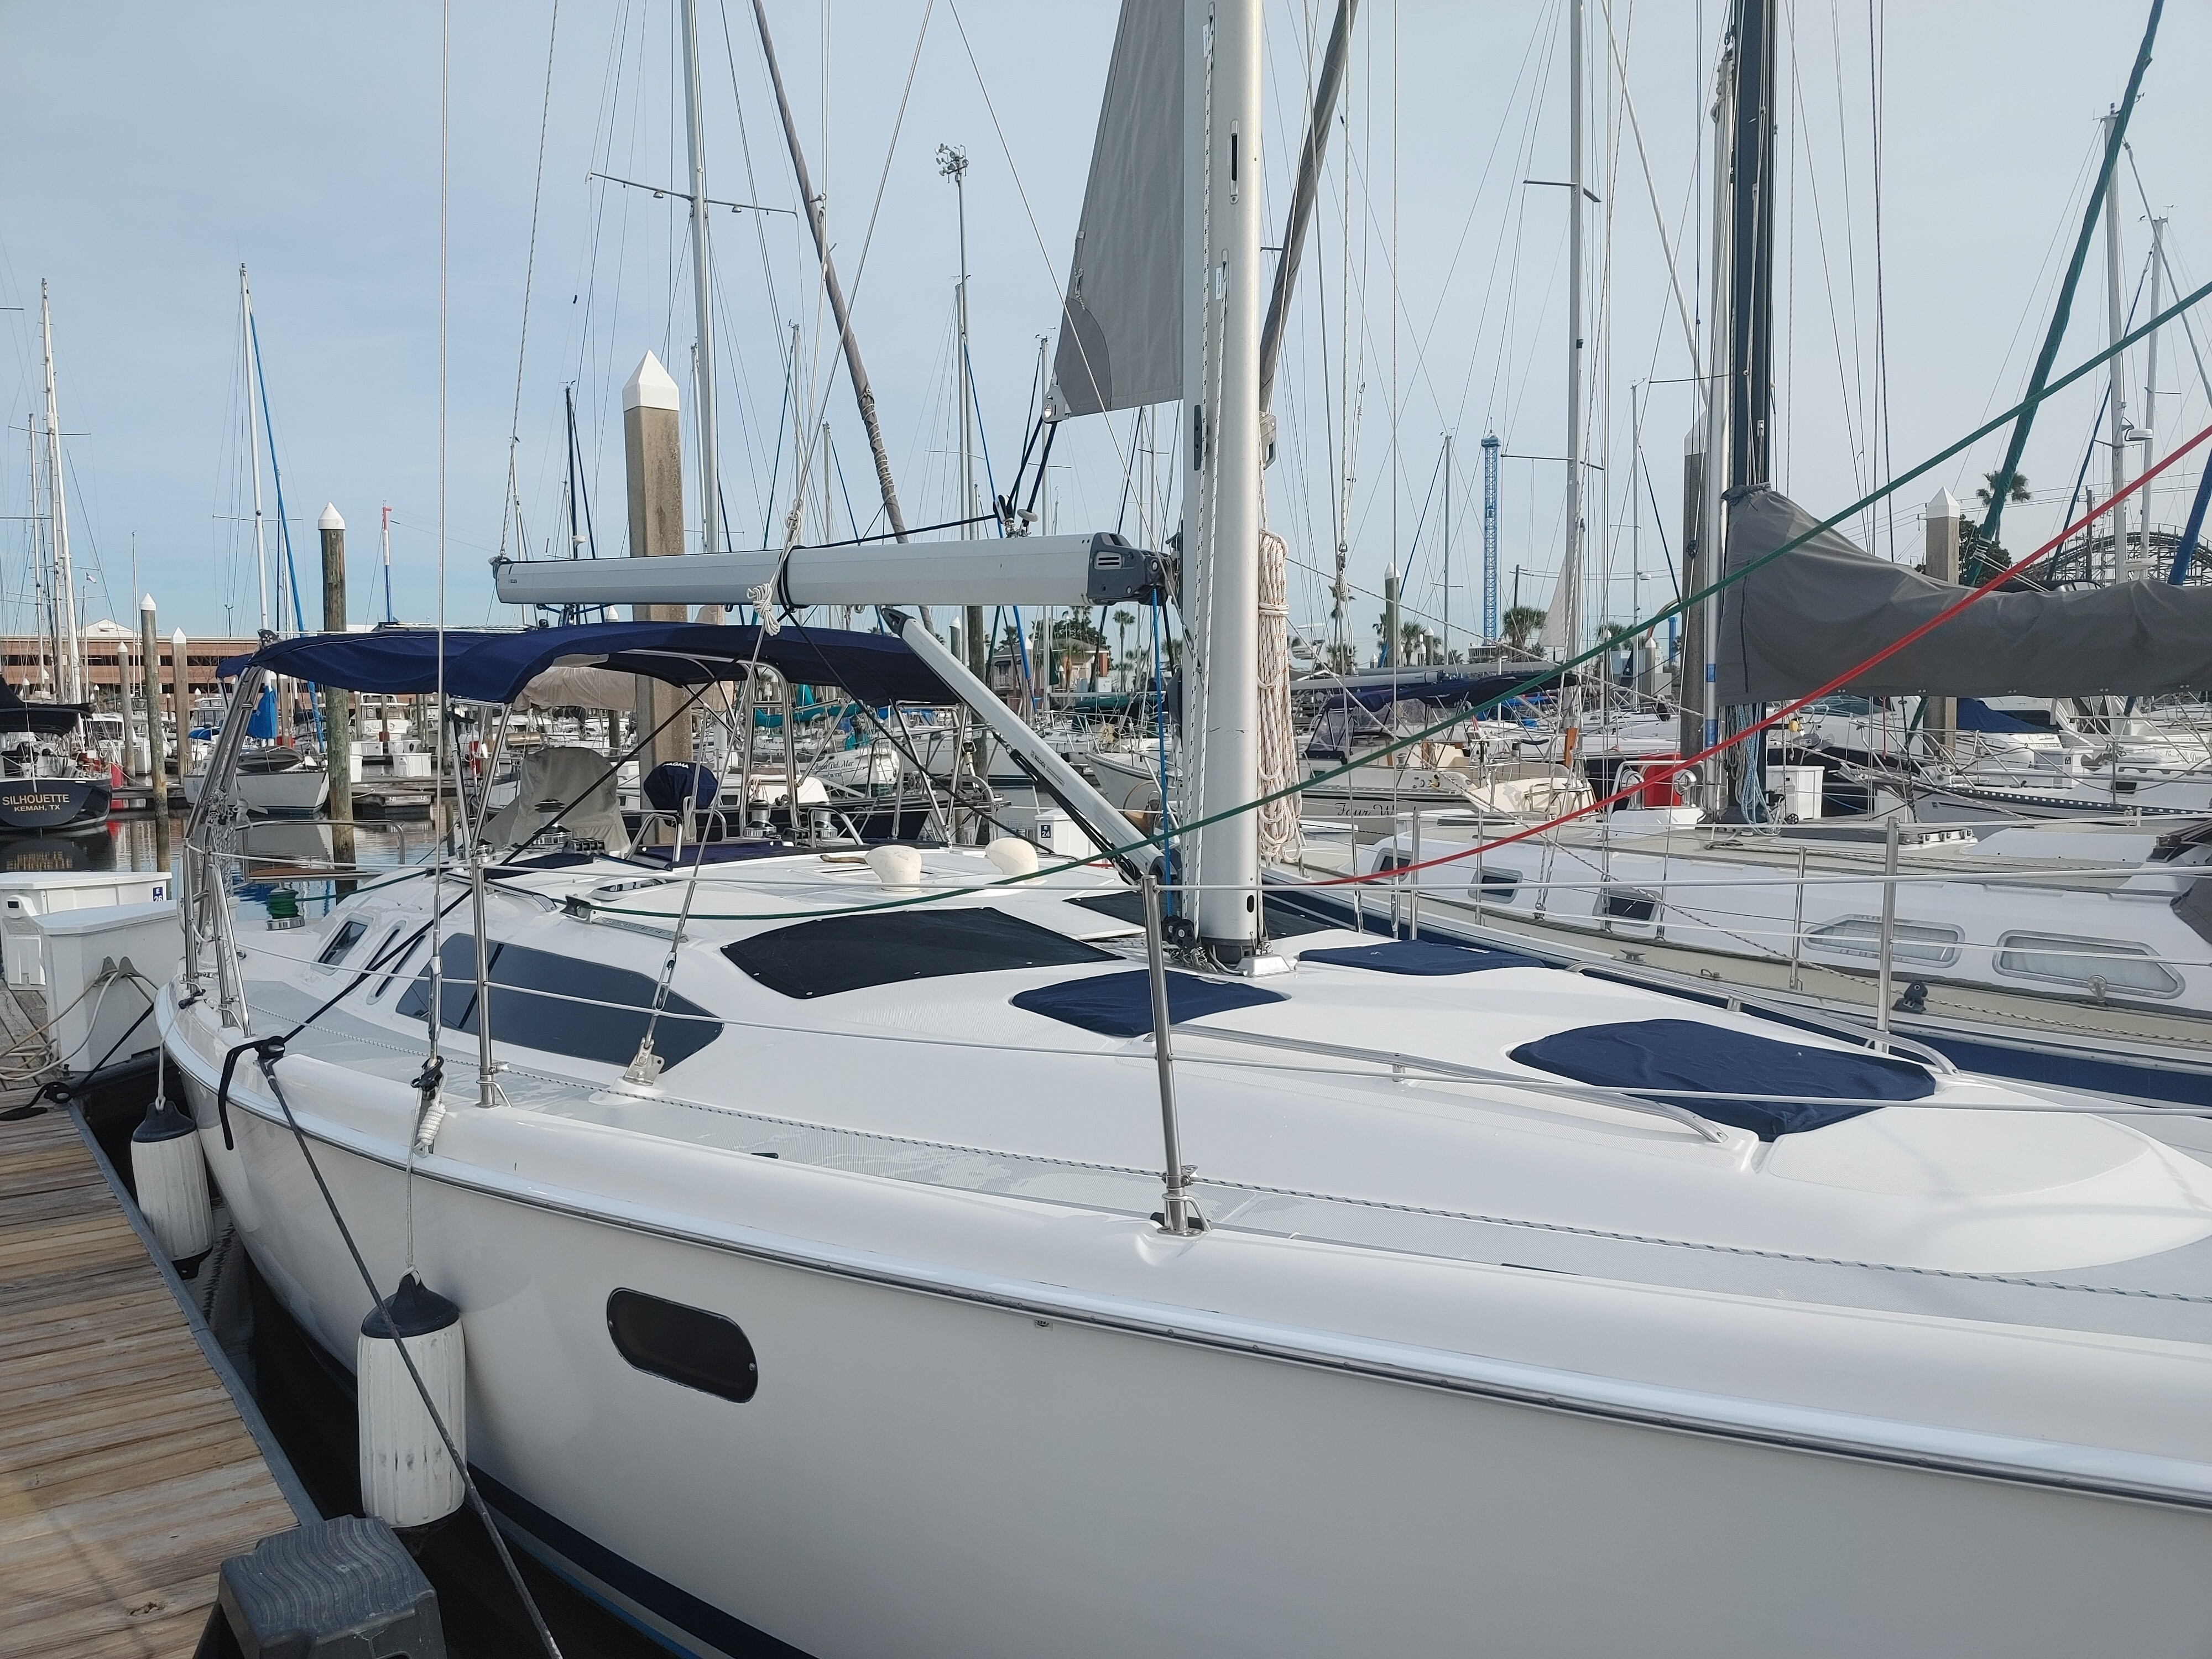 Used Sail Monohull for Sale 2002 Hunter 380 Additional Information